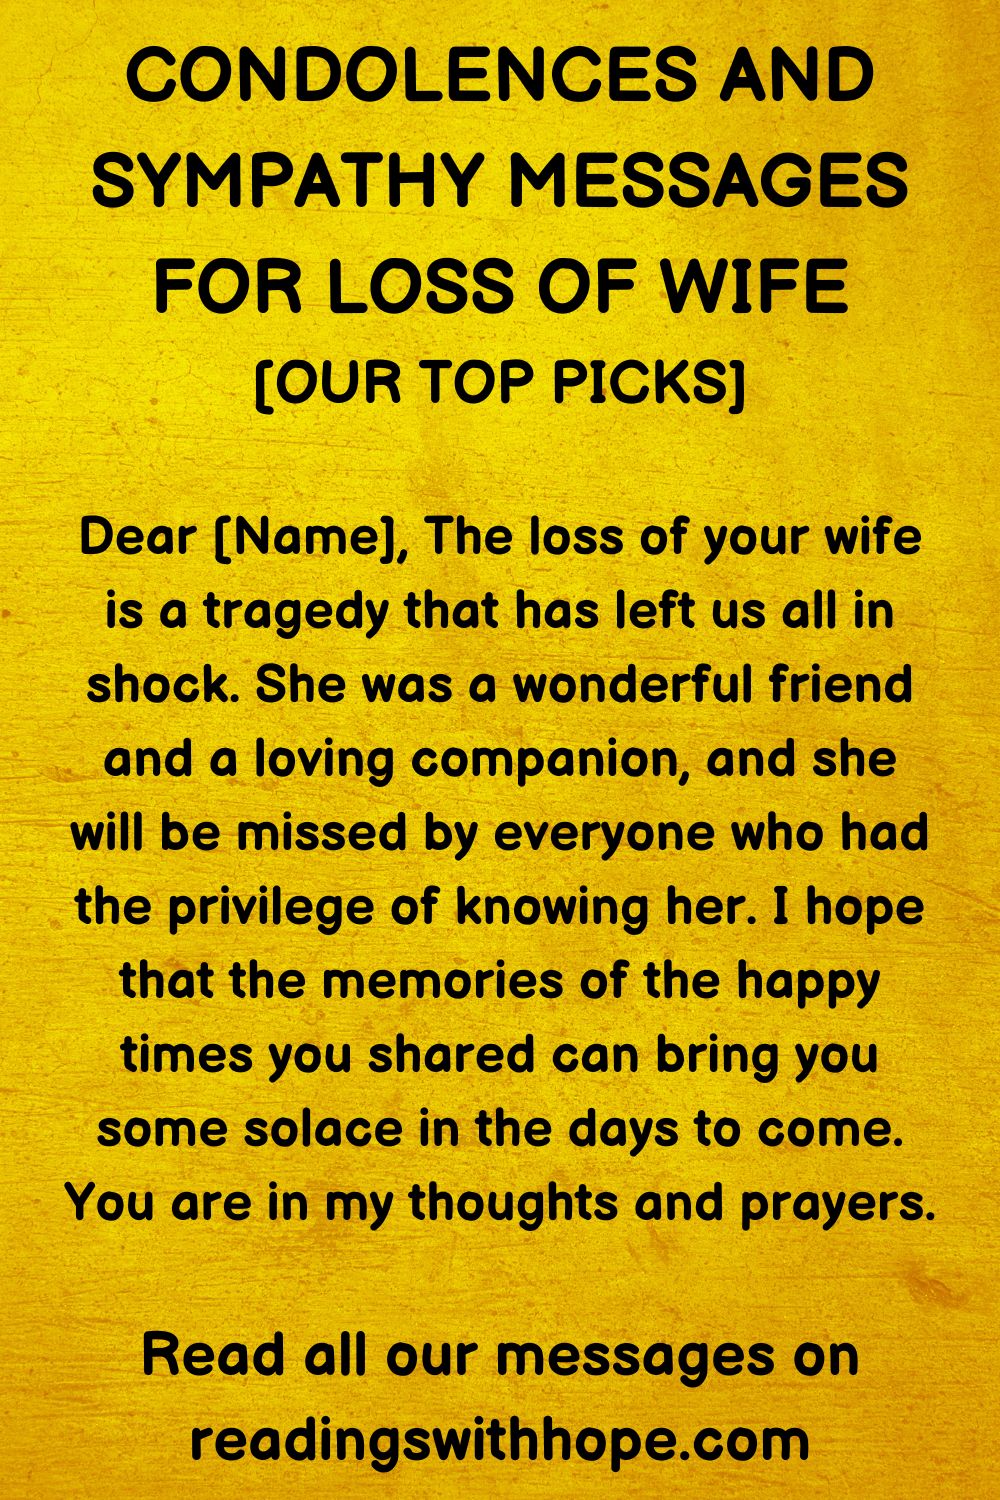 40 Condolences and Sympathy Messages for Loss of Wife